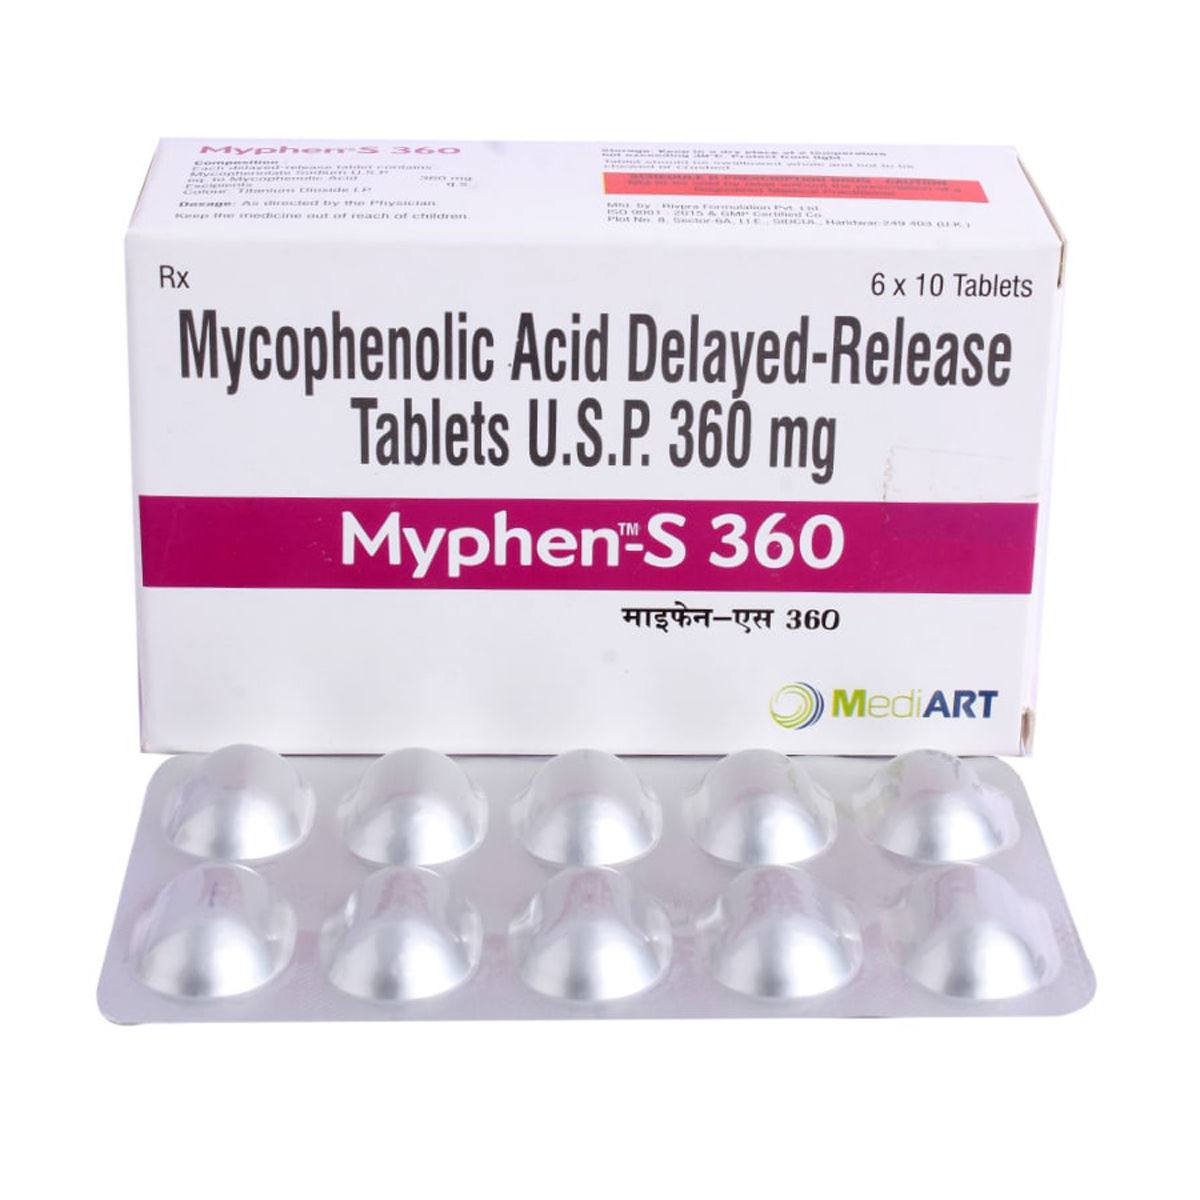 Myphen-S 360mg Tablet 10's, Pack of 10 TABLETS